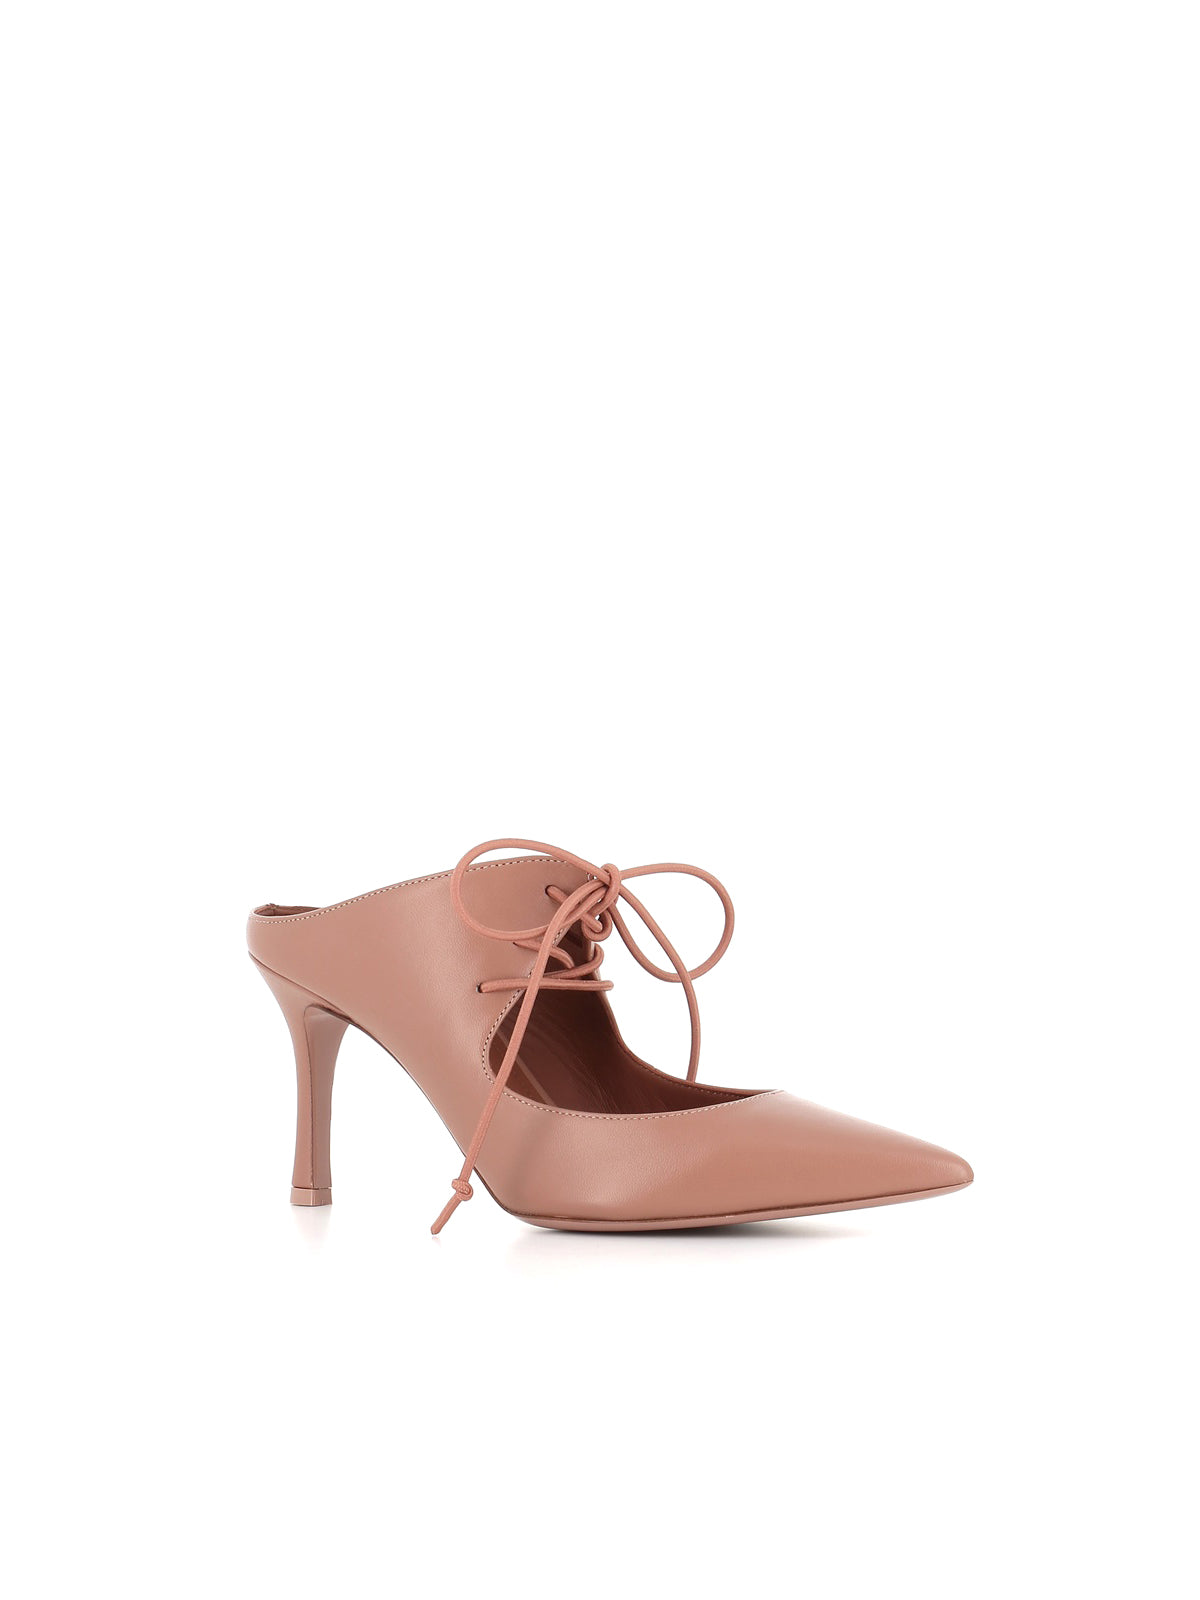  Sabot Marcia 80-3 Malone Souliers Donna Rosa - 3